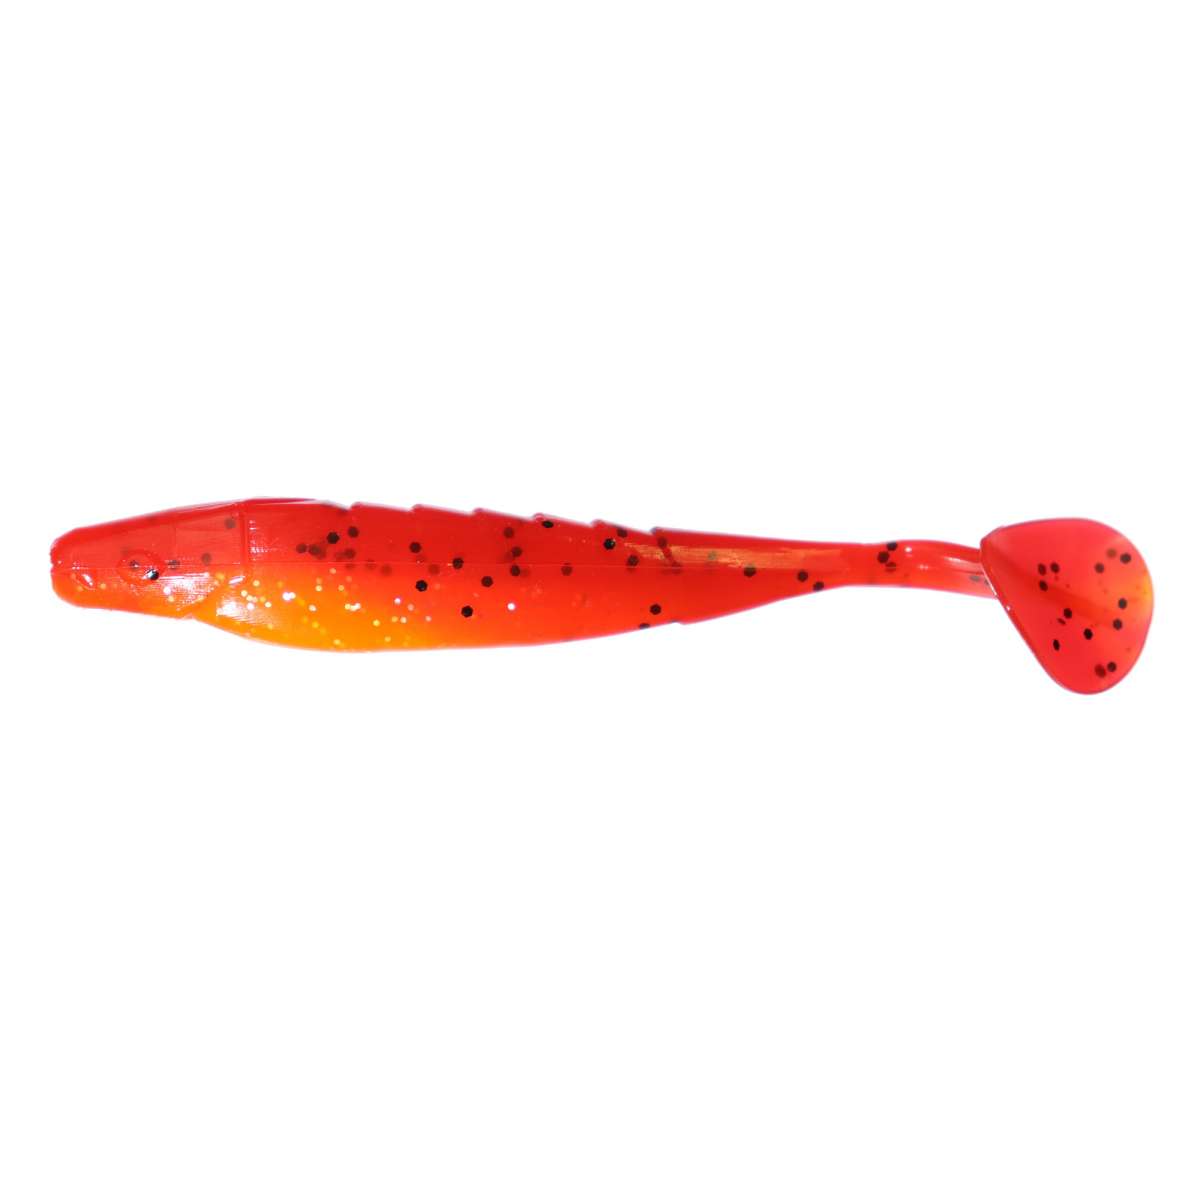 Missile Baits has a New Craw